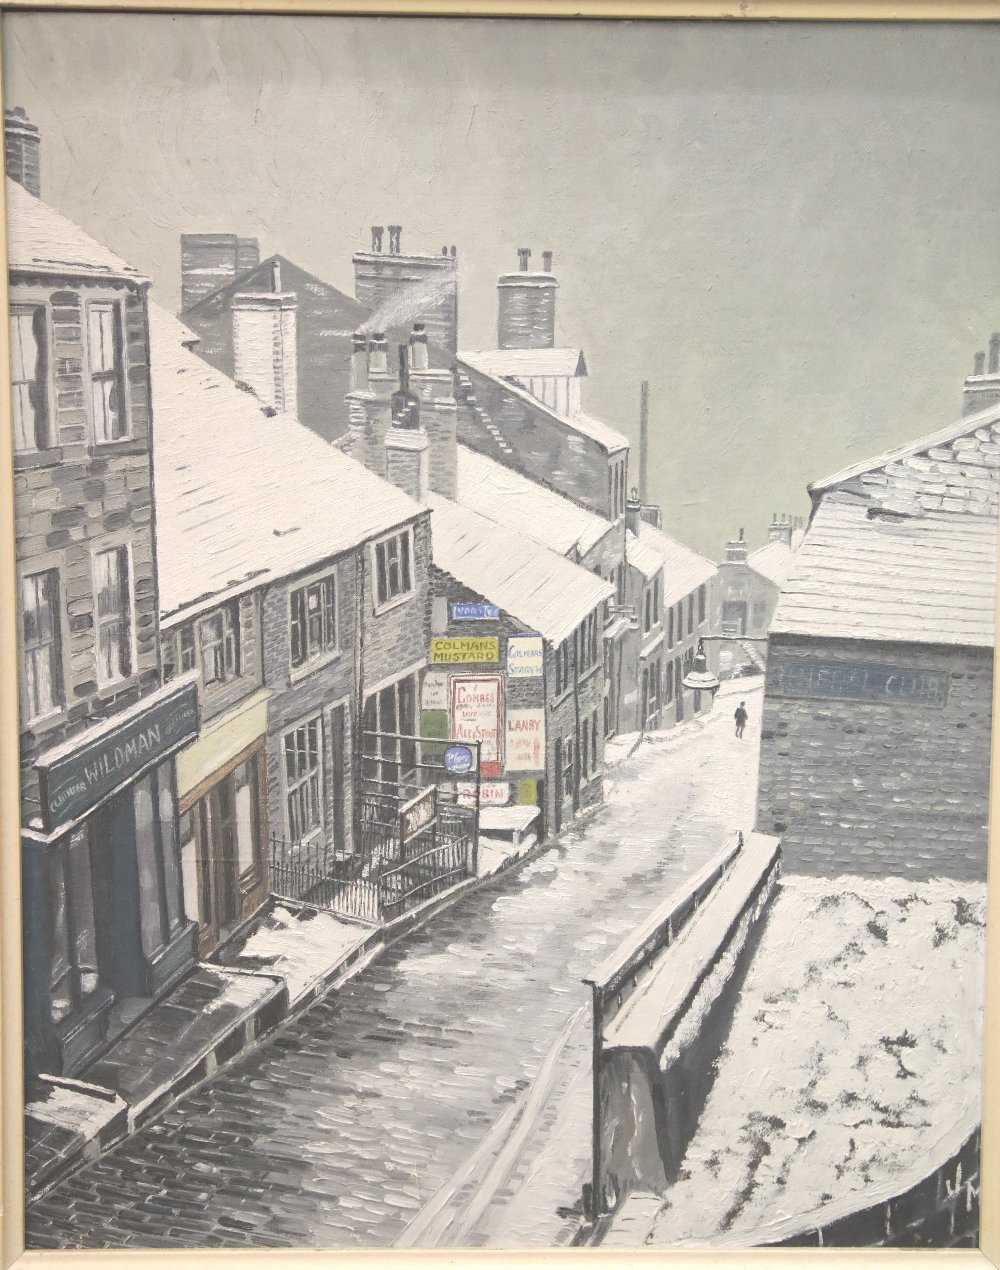 Joan Murgatroyd, oil on board, Hawarth, Yorkshire 38 x 52 cm. P&P Group 3, (£25+VAT for the first